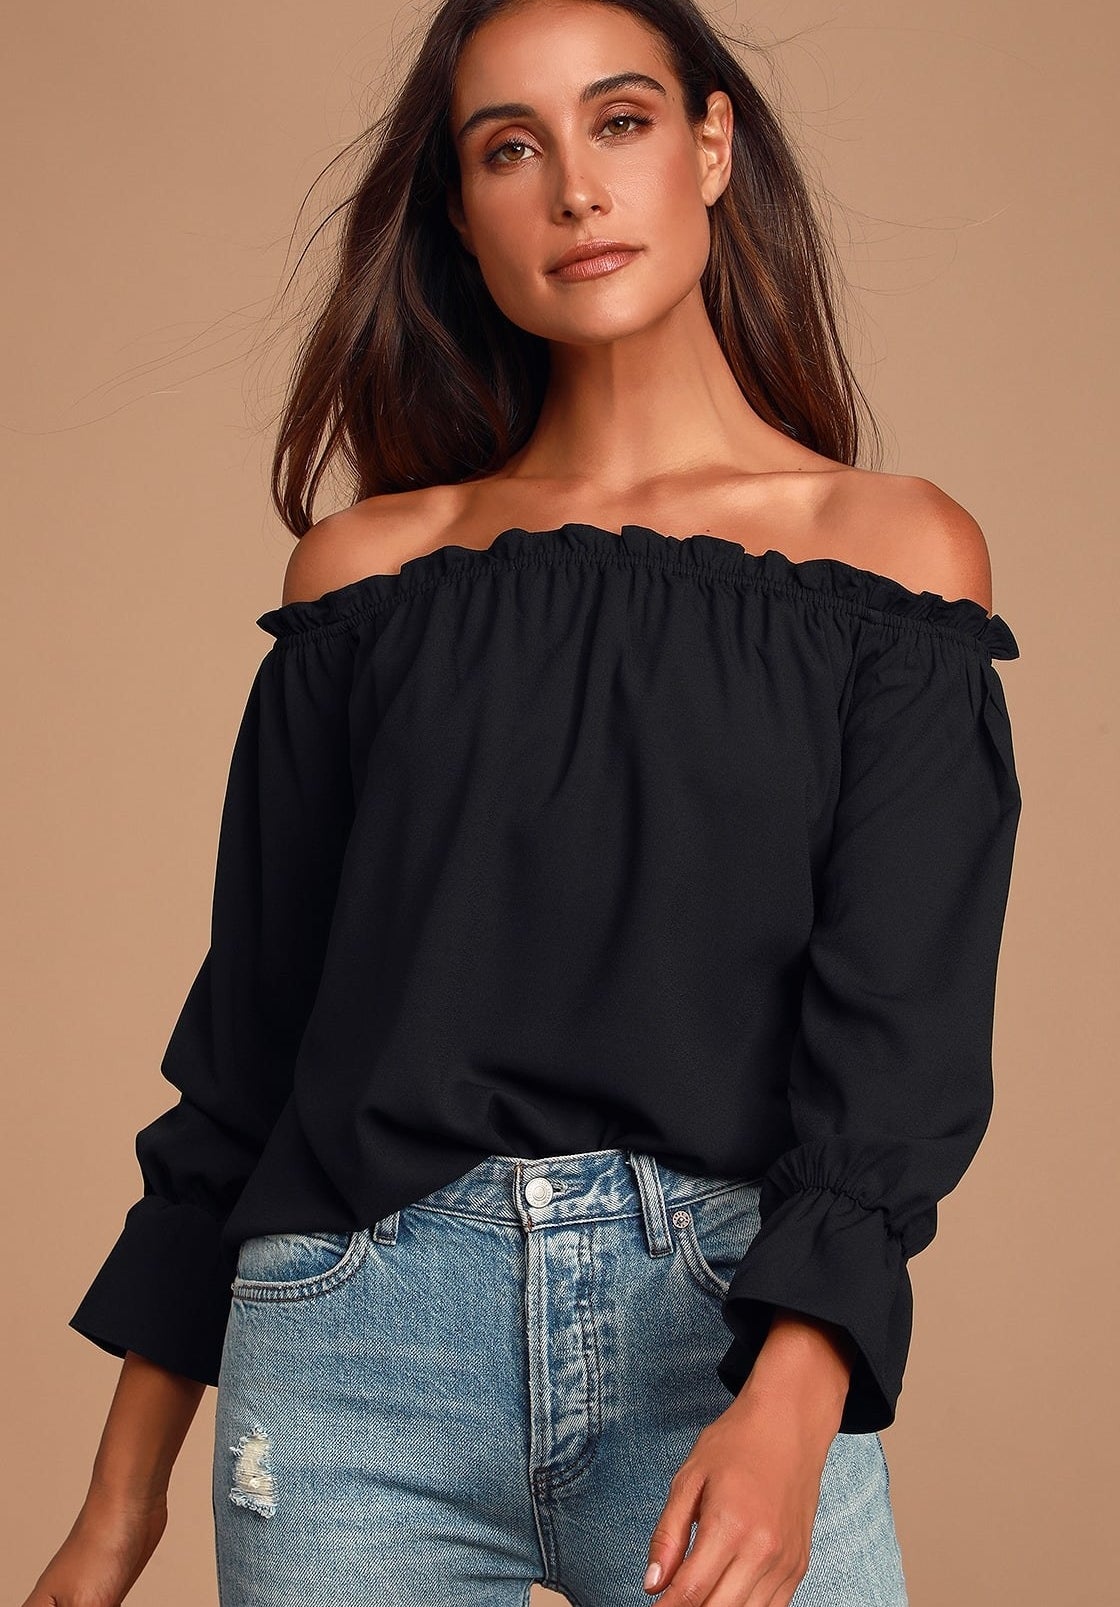 Model is wearing a black smocked off the shoulder top with denim jeans